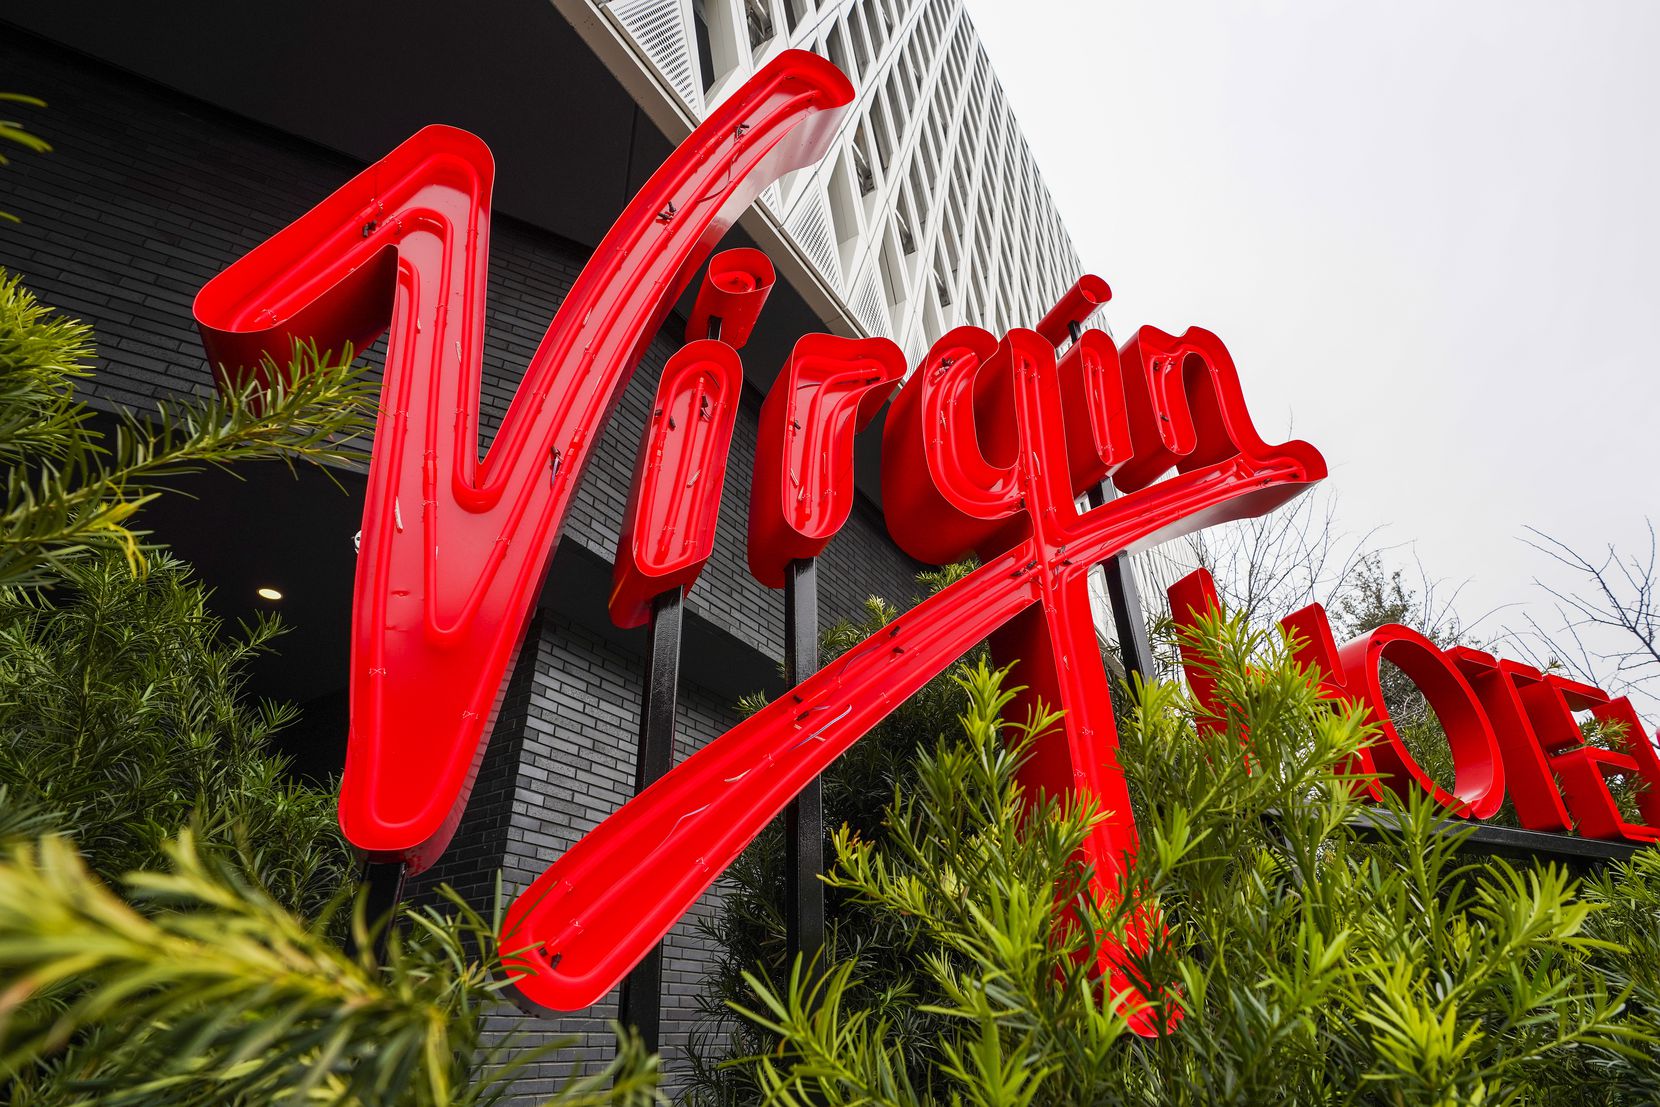 Virgin Hotels Dallas will host drag brunches and pool parties July 4 weekend.

